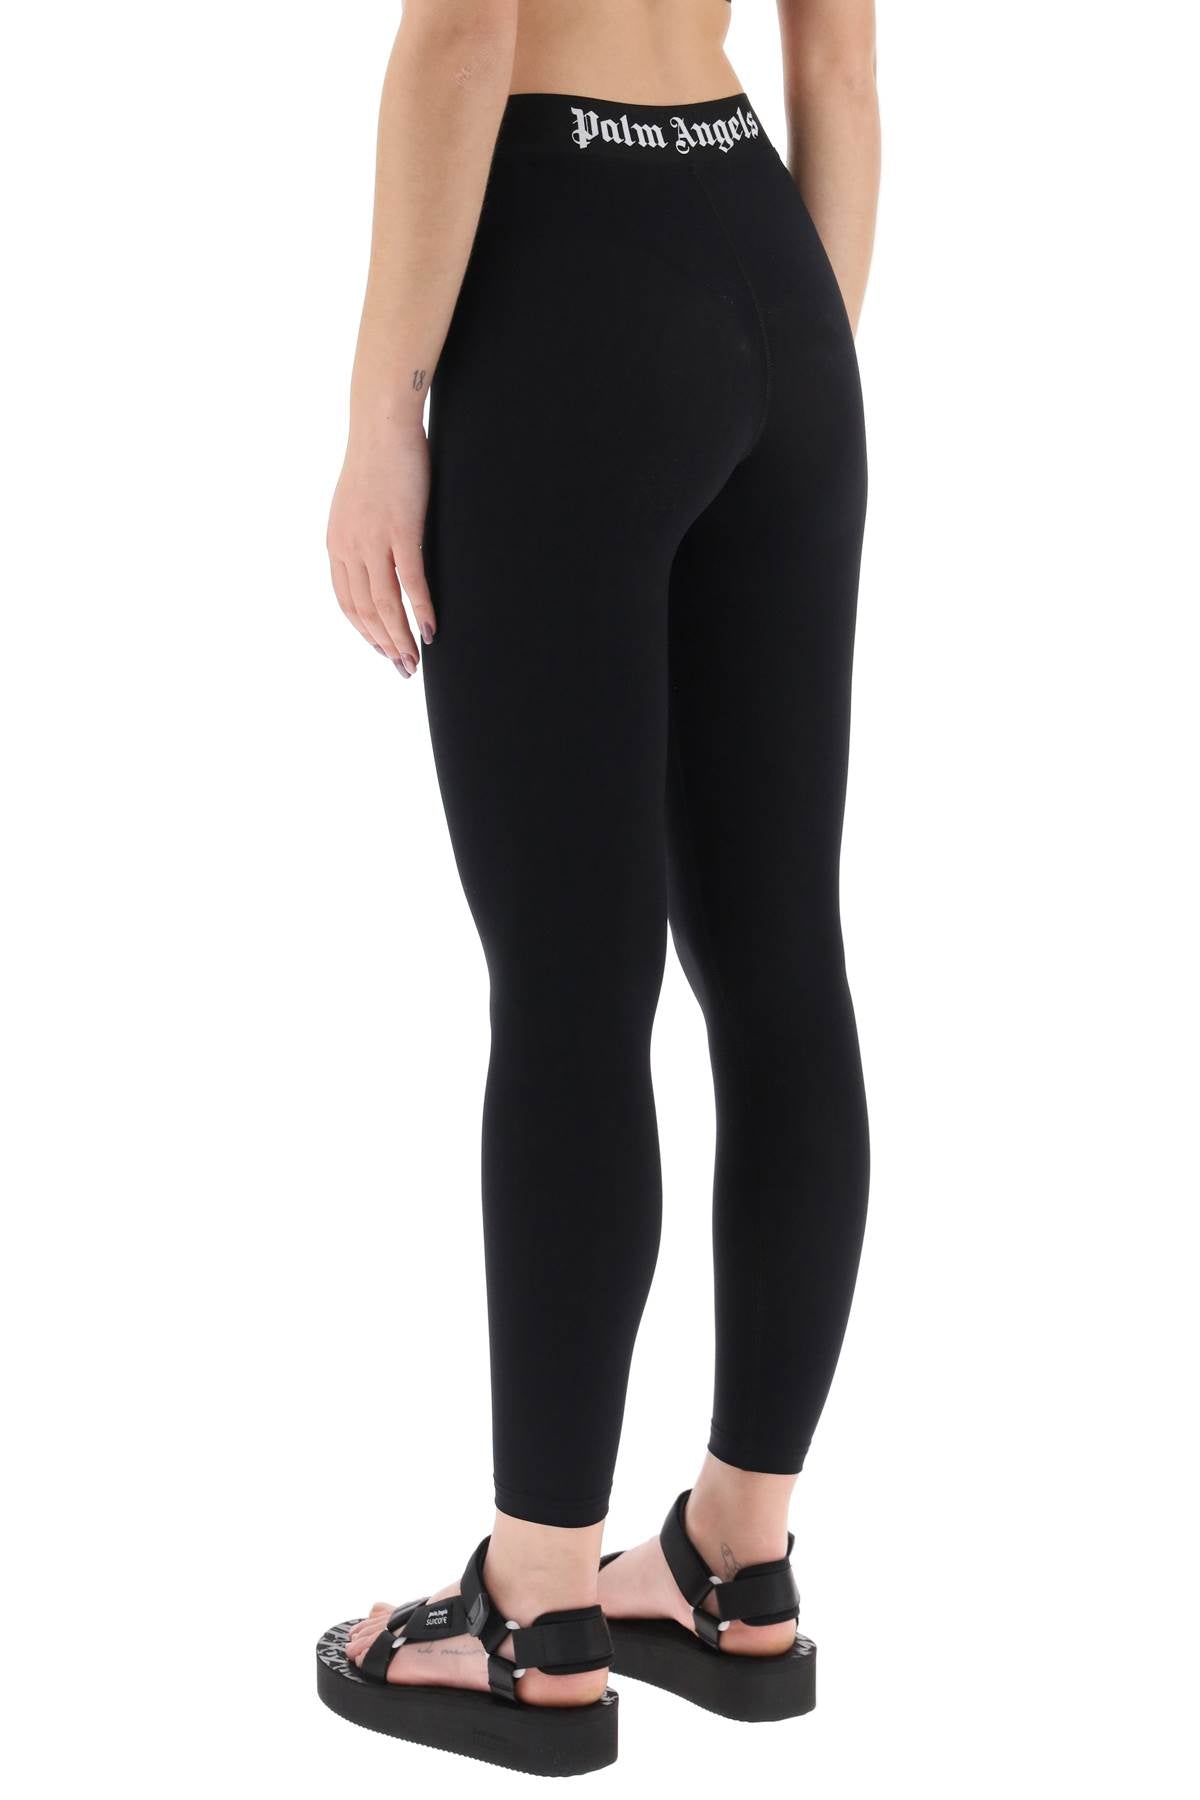 Palm angels sporty leggings with branded stripe-2